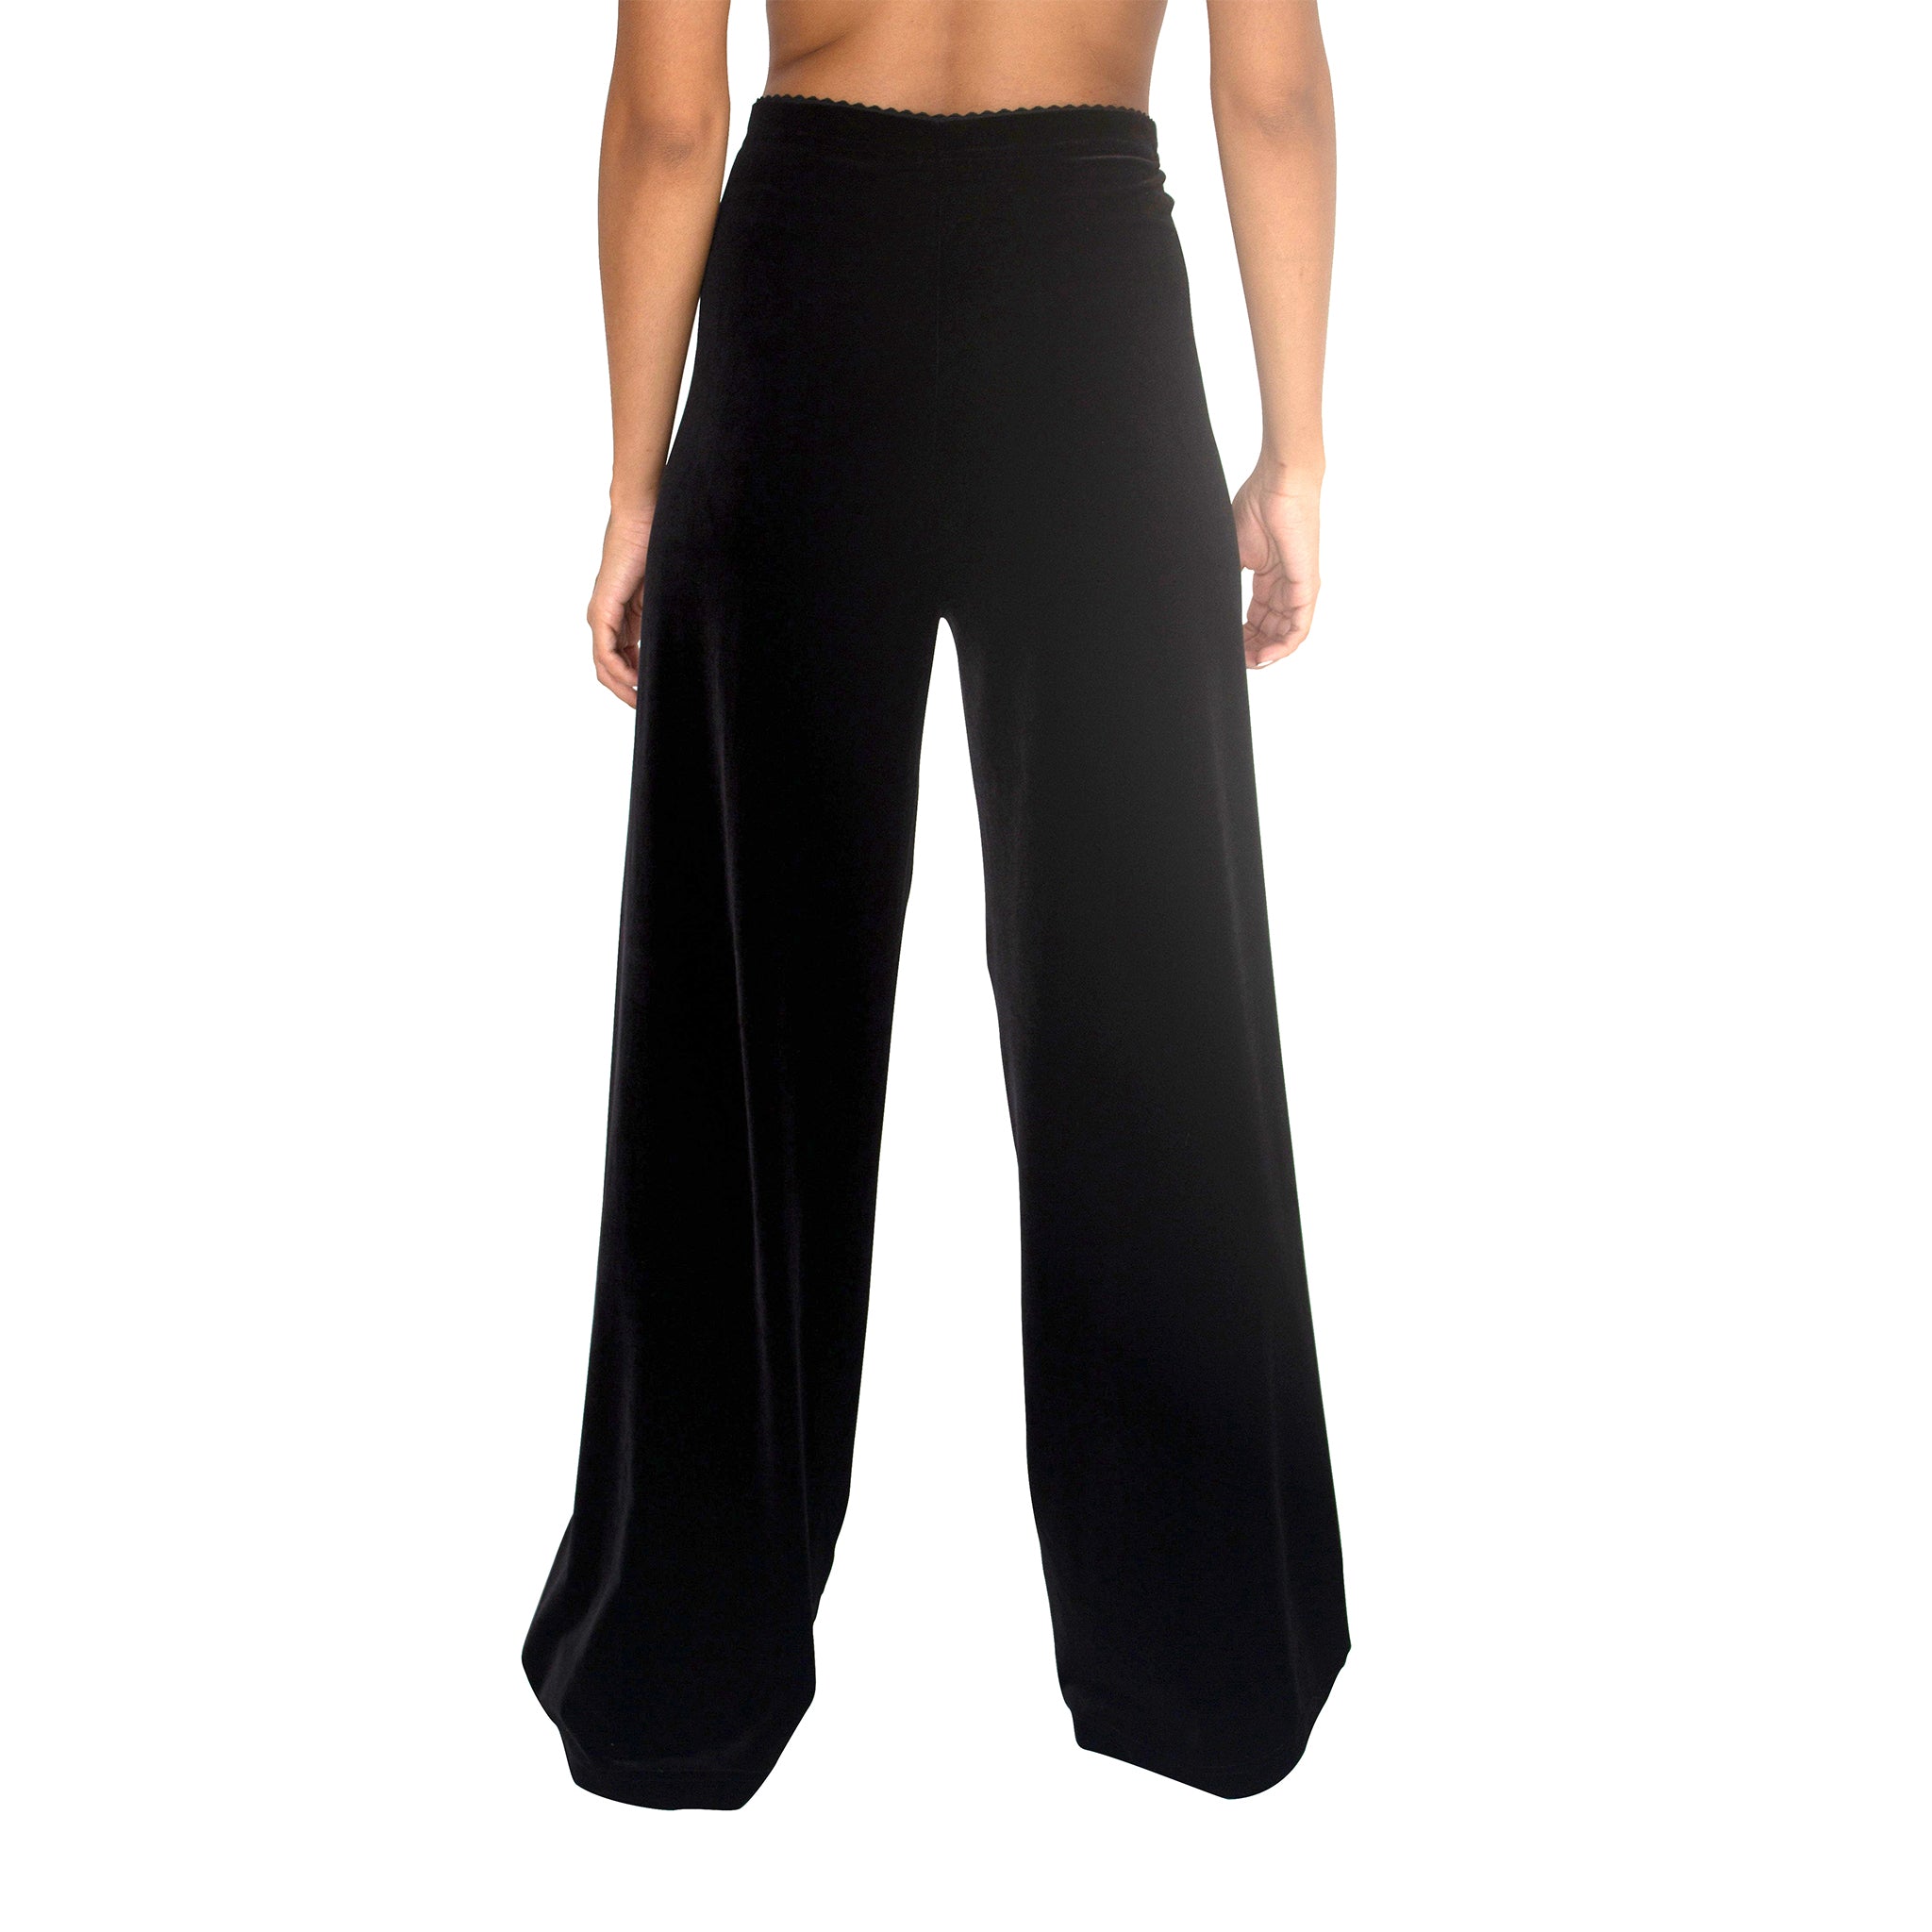 Back view of Stretch Velvet Track Pant in Black has elastic waist with 32" inseam